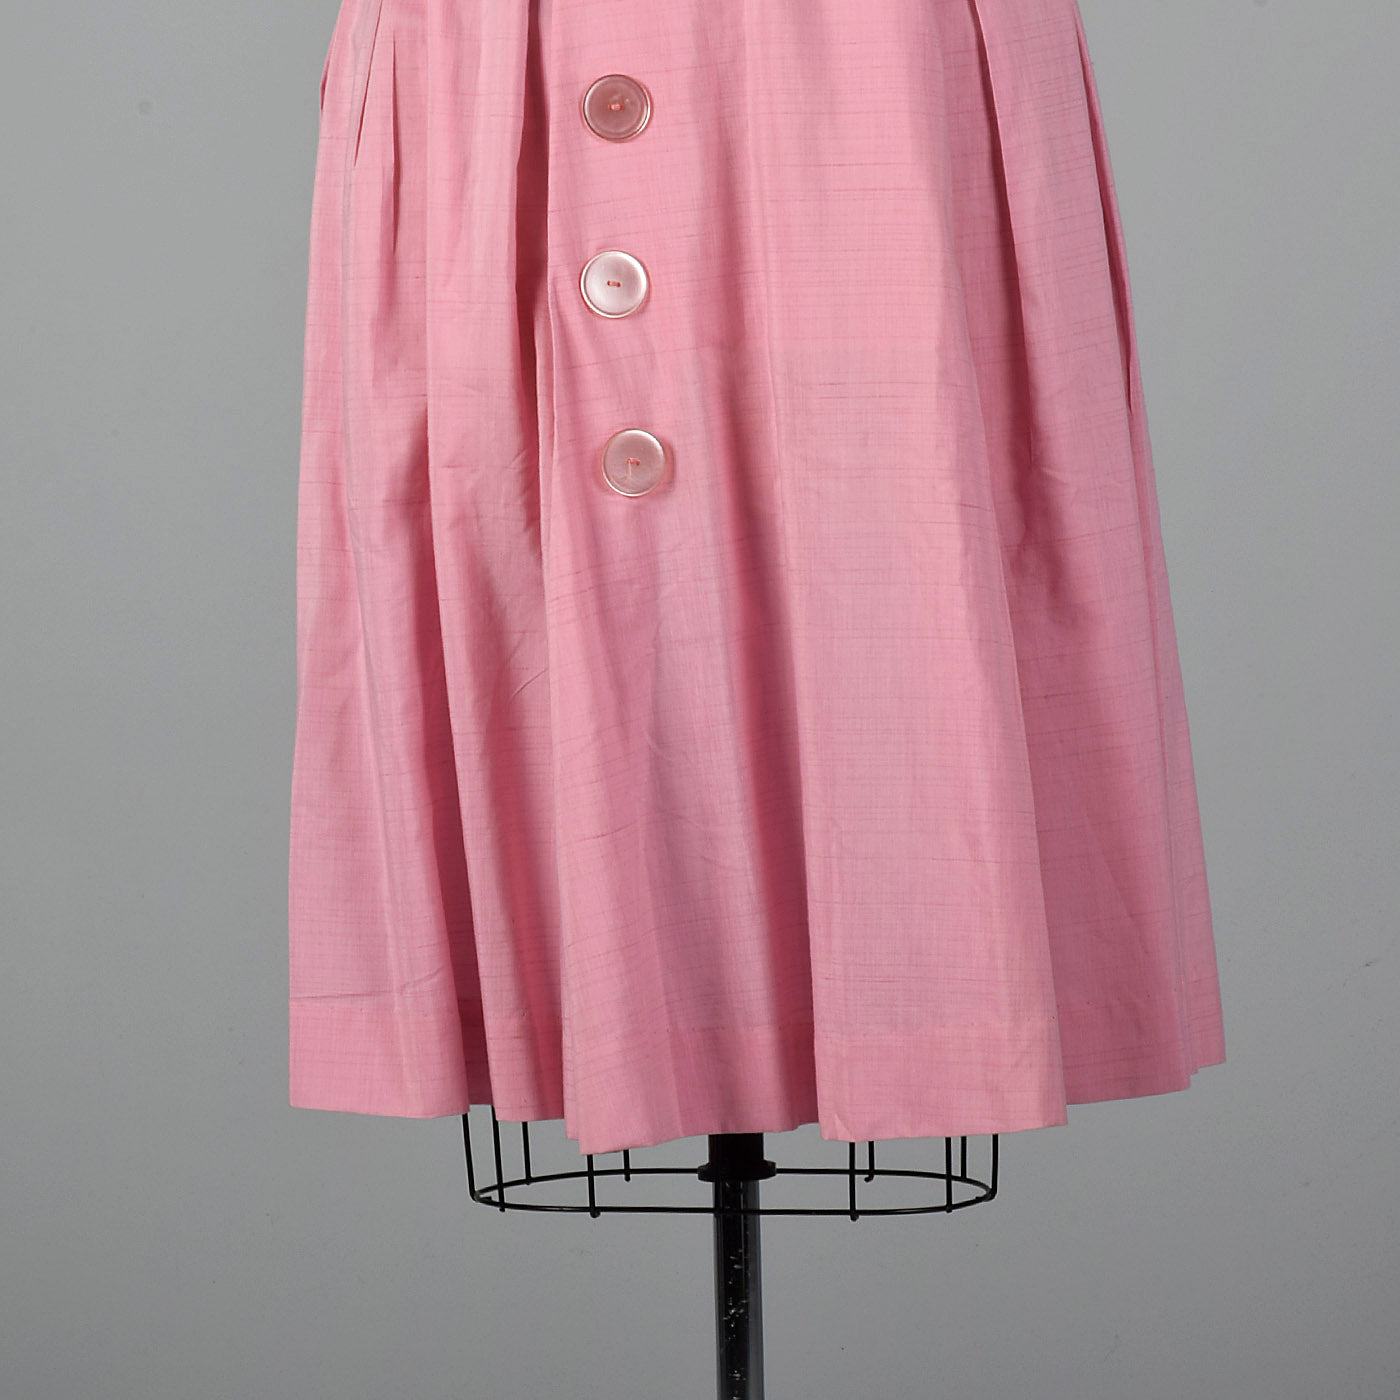 1950s Pink Polished Cotton Dress with Large Buttons